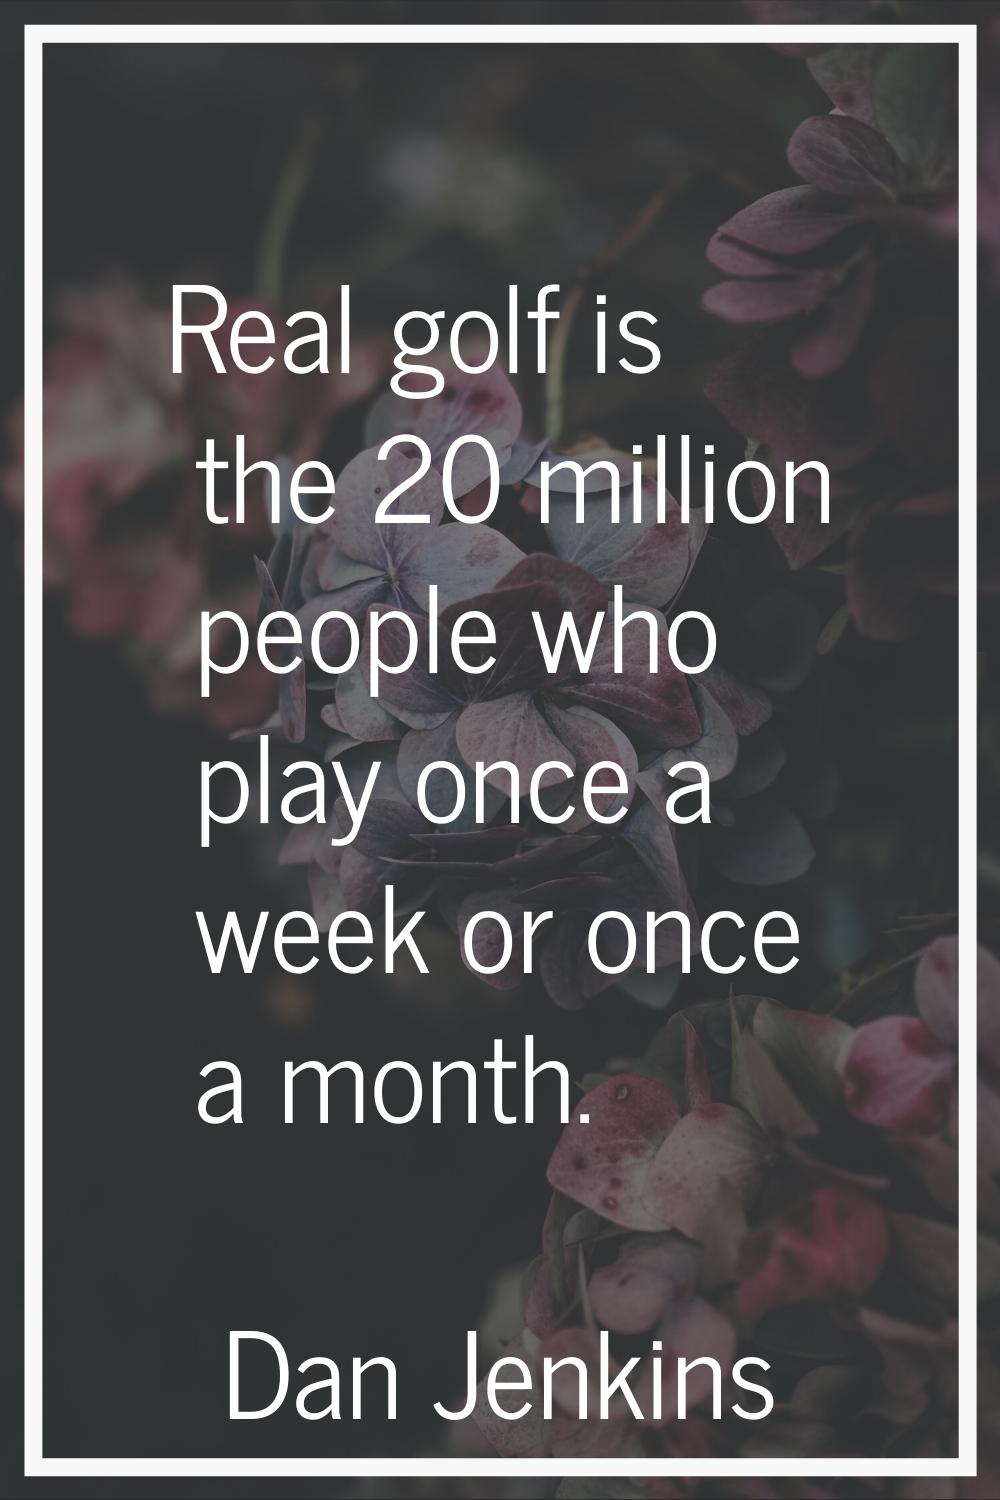 Real golf is the 20 million people who play once a week or once a month.